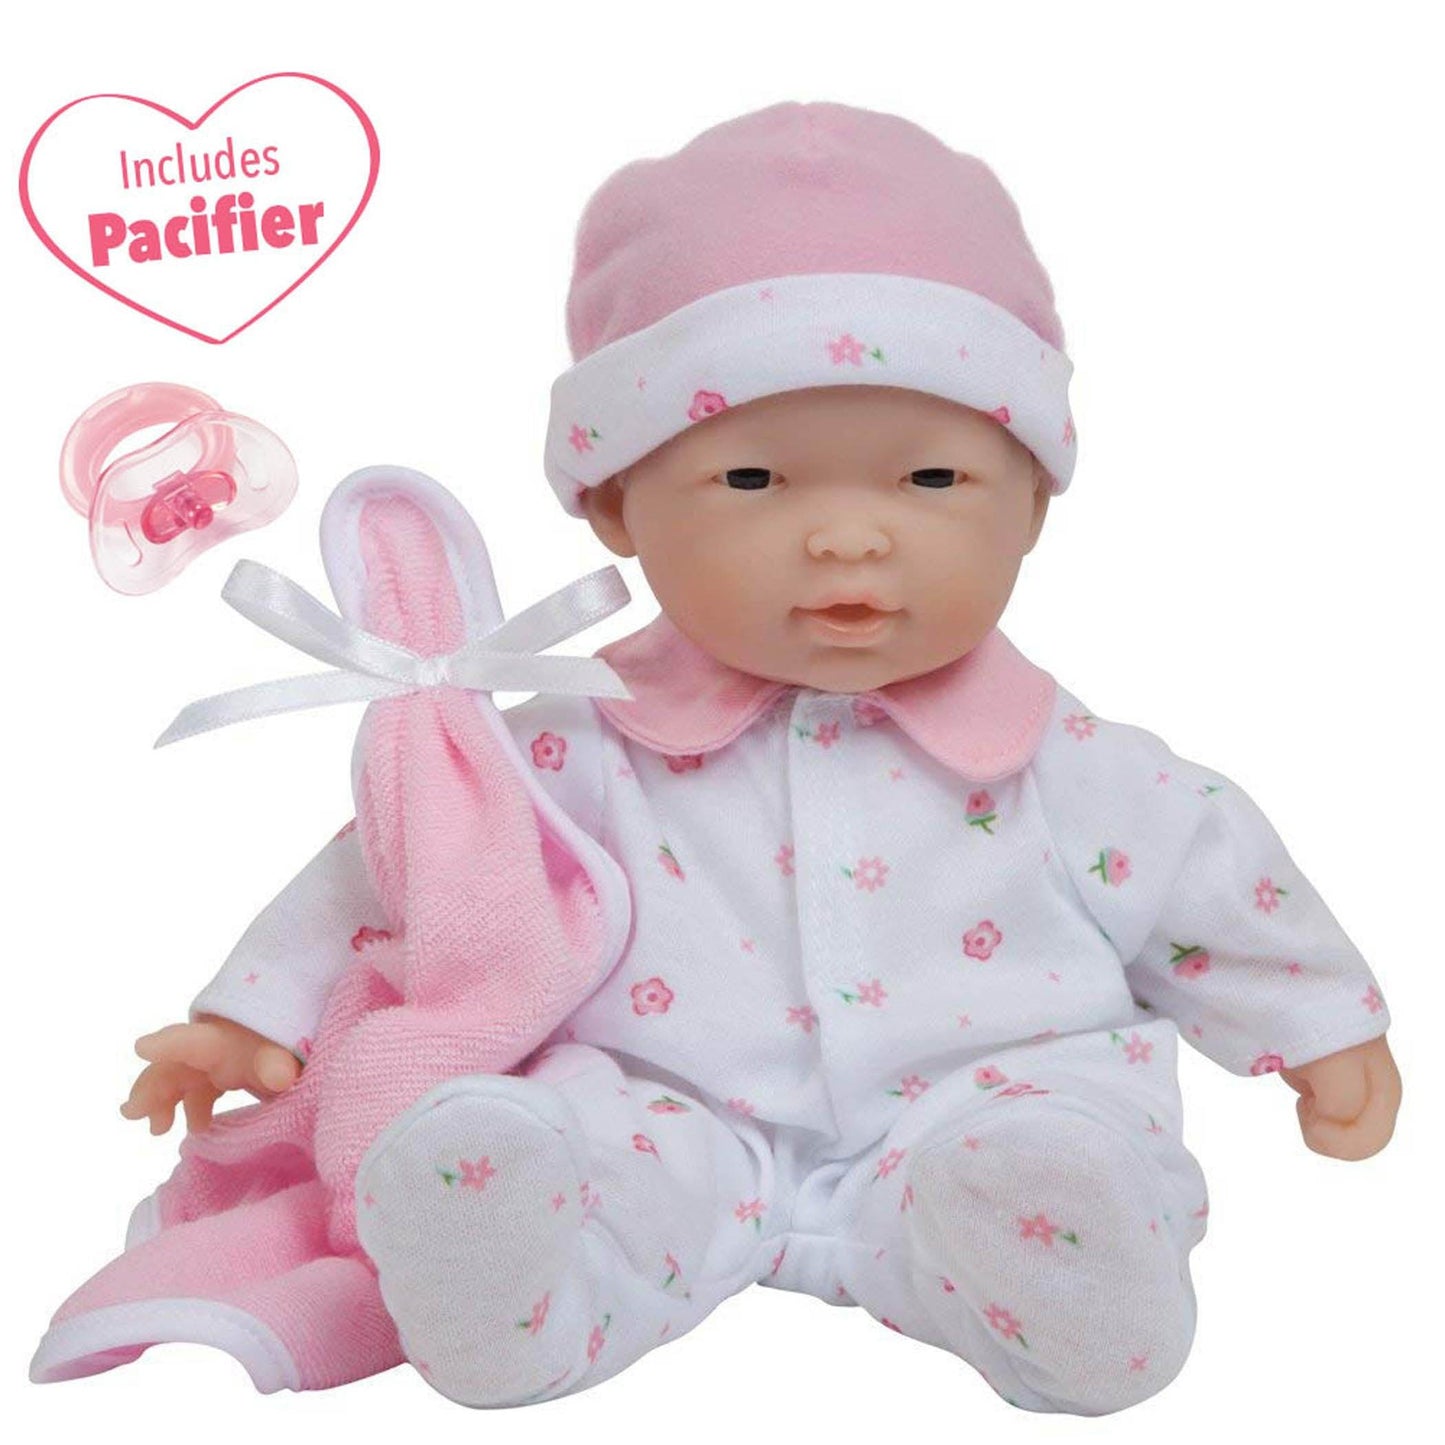 La Baby Soft 11" Baby Doll, Pink with Blanket, Asian - Loomini